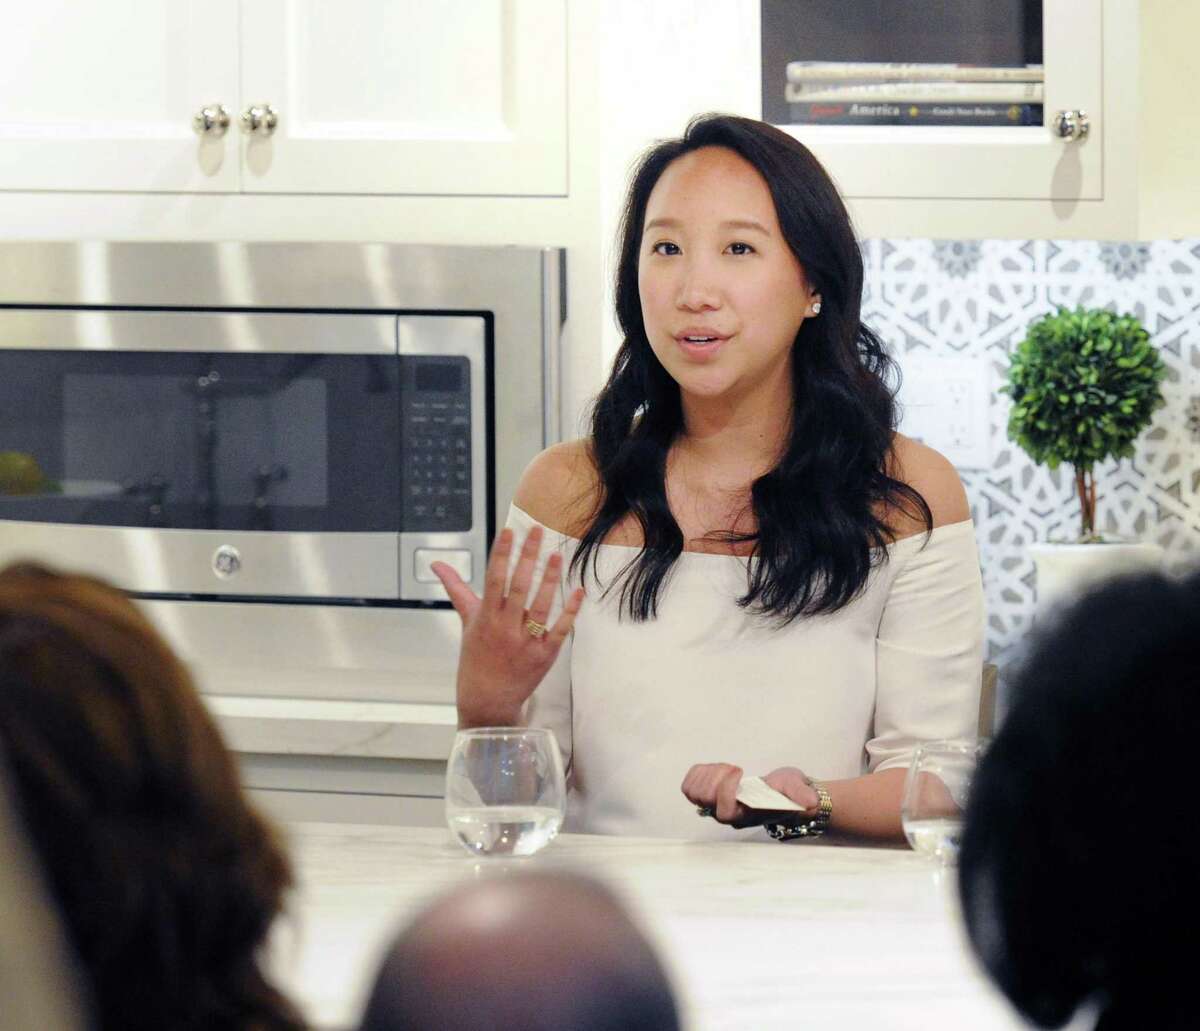 Greenwich resident Katie Fong, a fashion designer and the owner of the Katie Fong Boutique in Greenwich, speaks during a Luxury Marketing Council panel event on millennial consumers at Curry & Kingston Cabinetry in the Cos Cob section of Greenwich, Conn., Wednesday night, April 19, 2017.